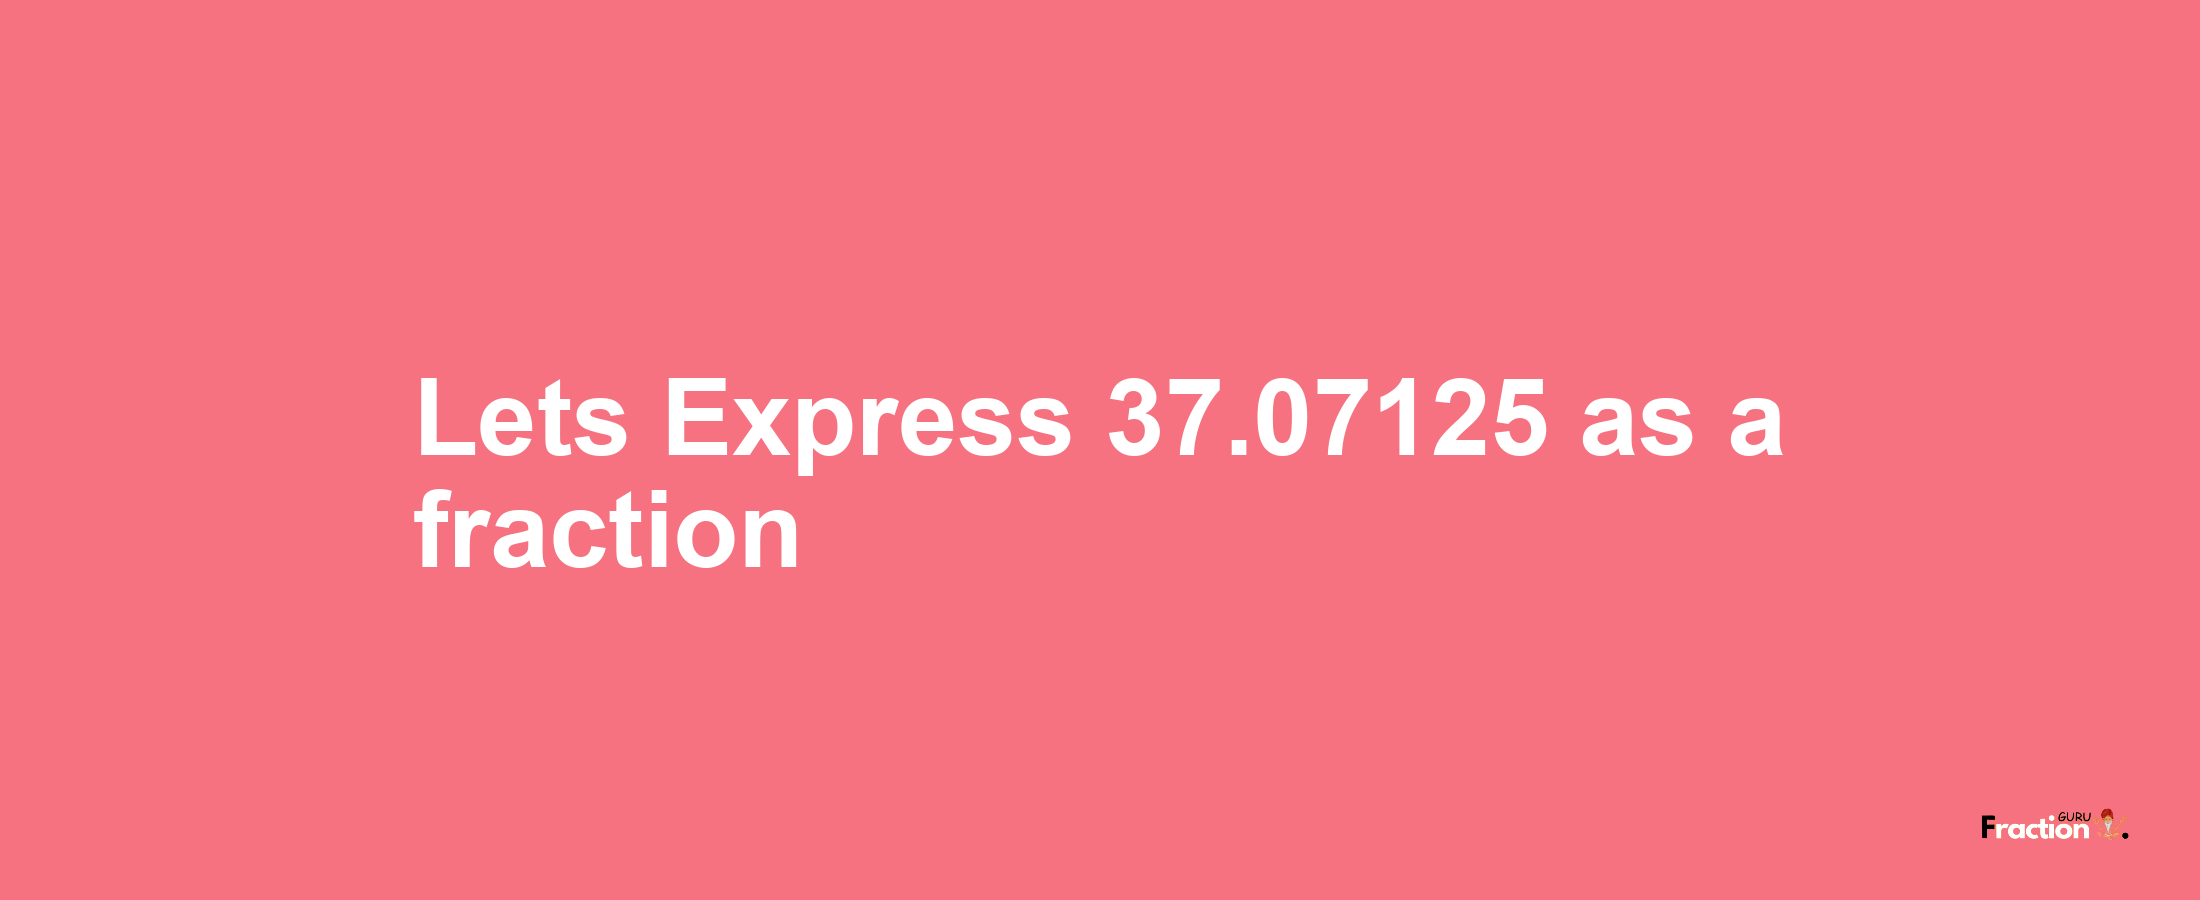 Lets Express 37.07125 as afraction